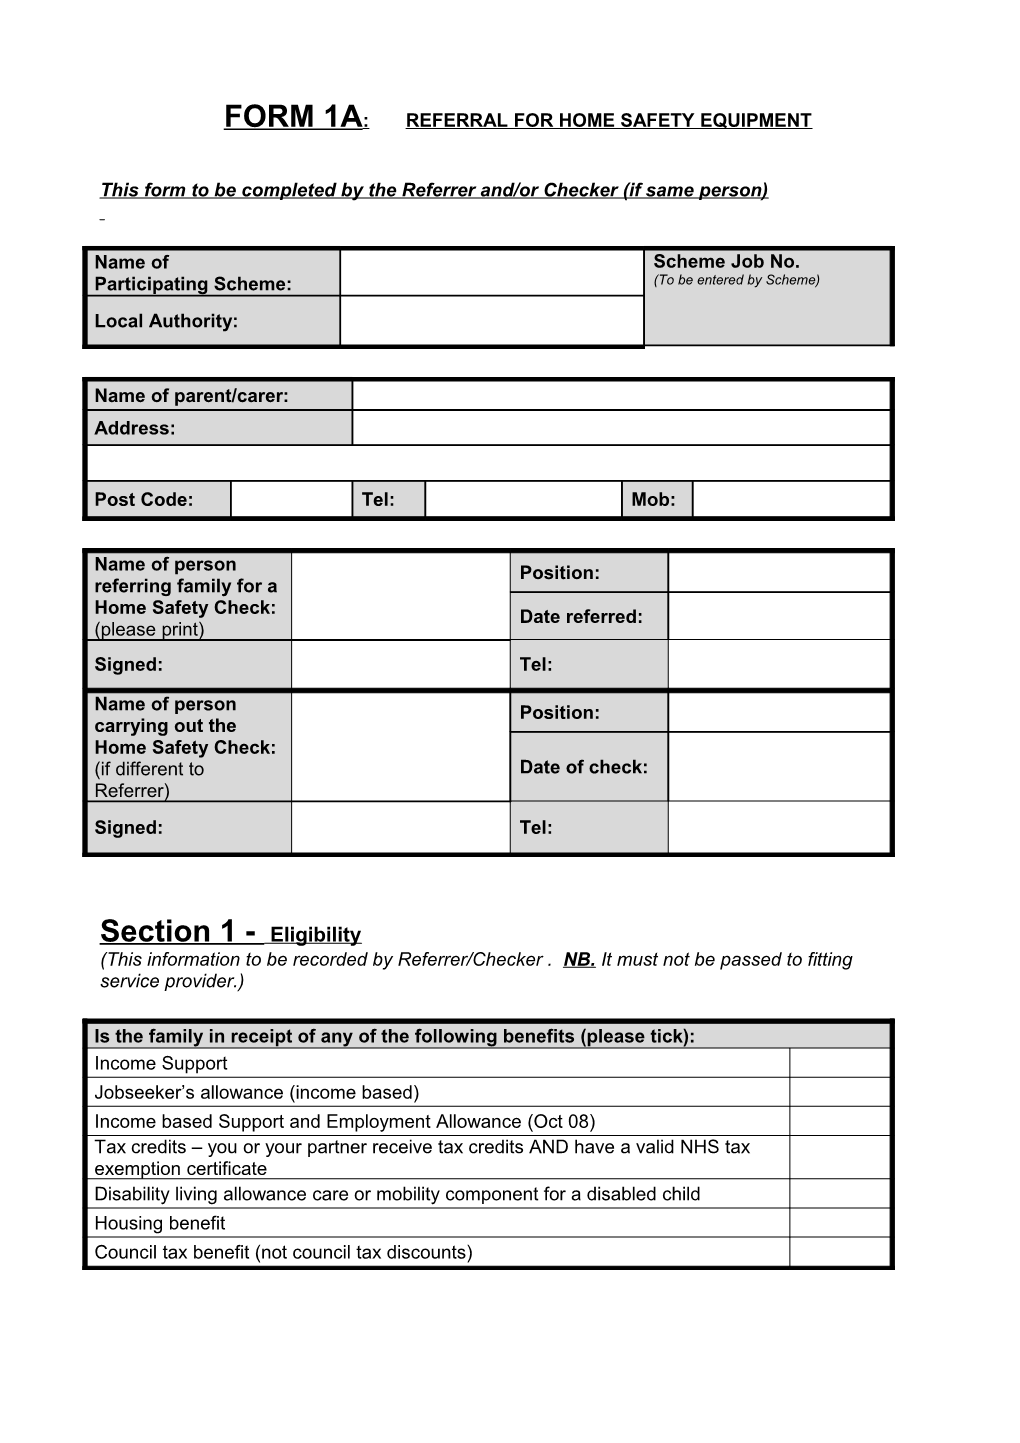 Form 1A: Referral for Home Safety Equipment